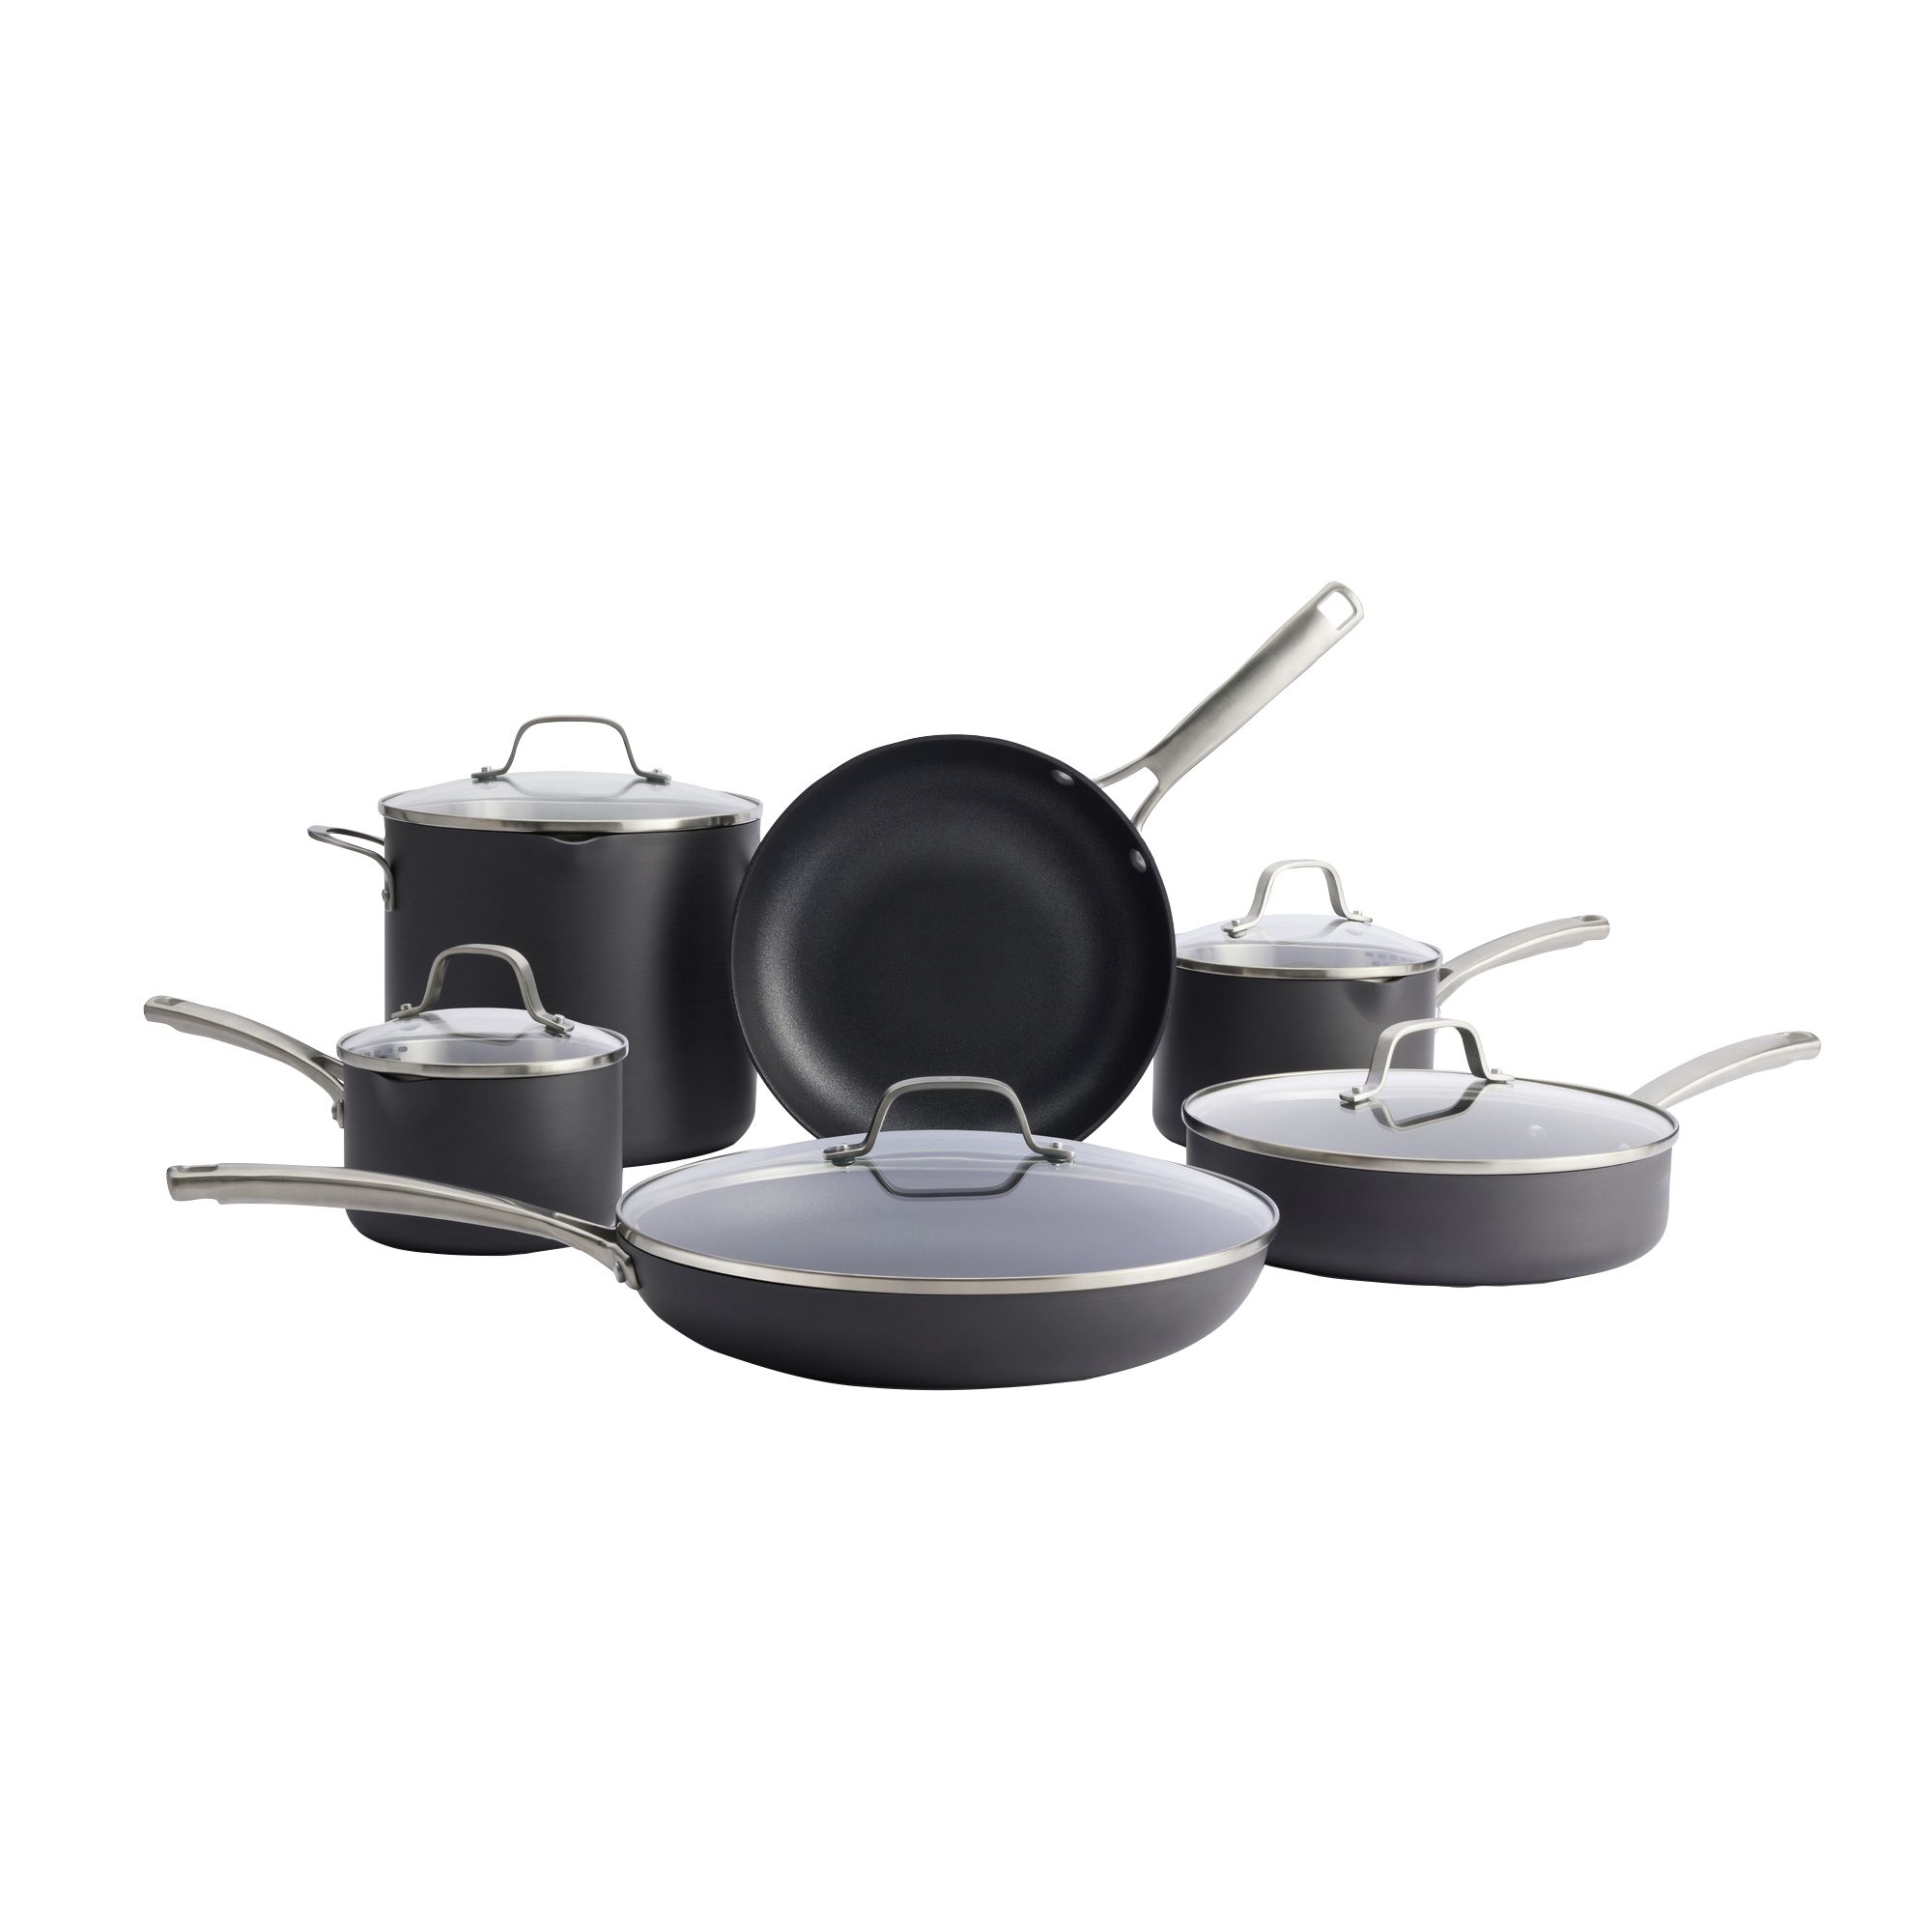 Cook N Home Professional Hard Anodized Nonstick Pots and Pans 10-Piece Cookware Set, with Stay-Cool Handles Black